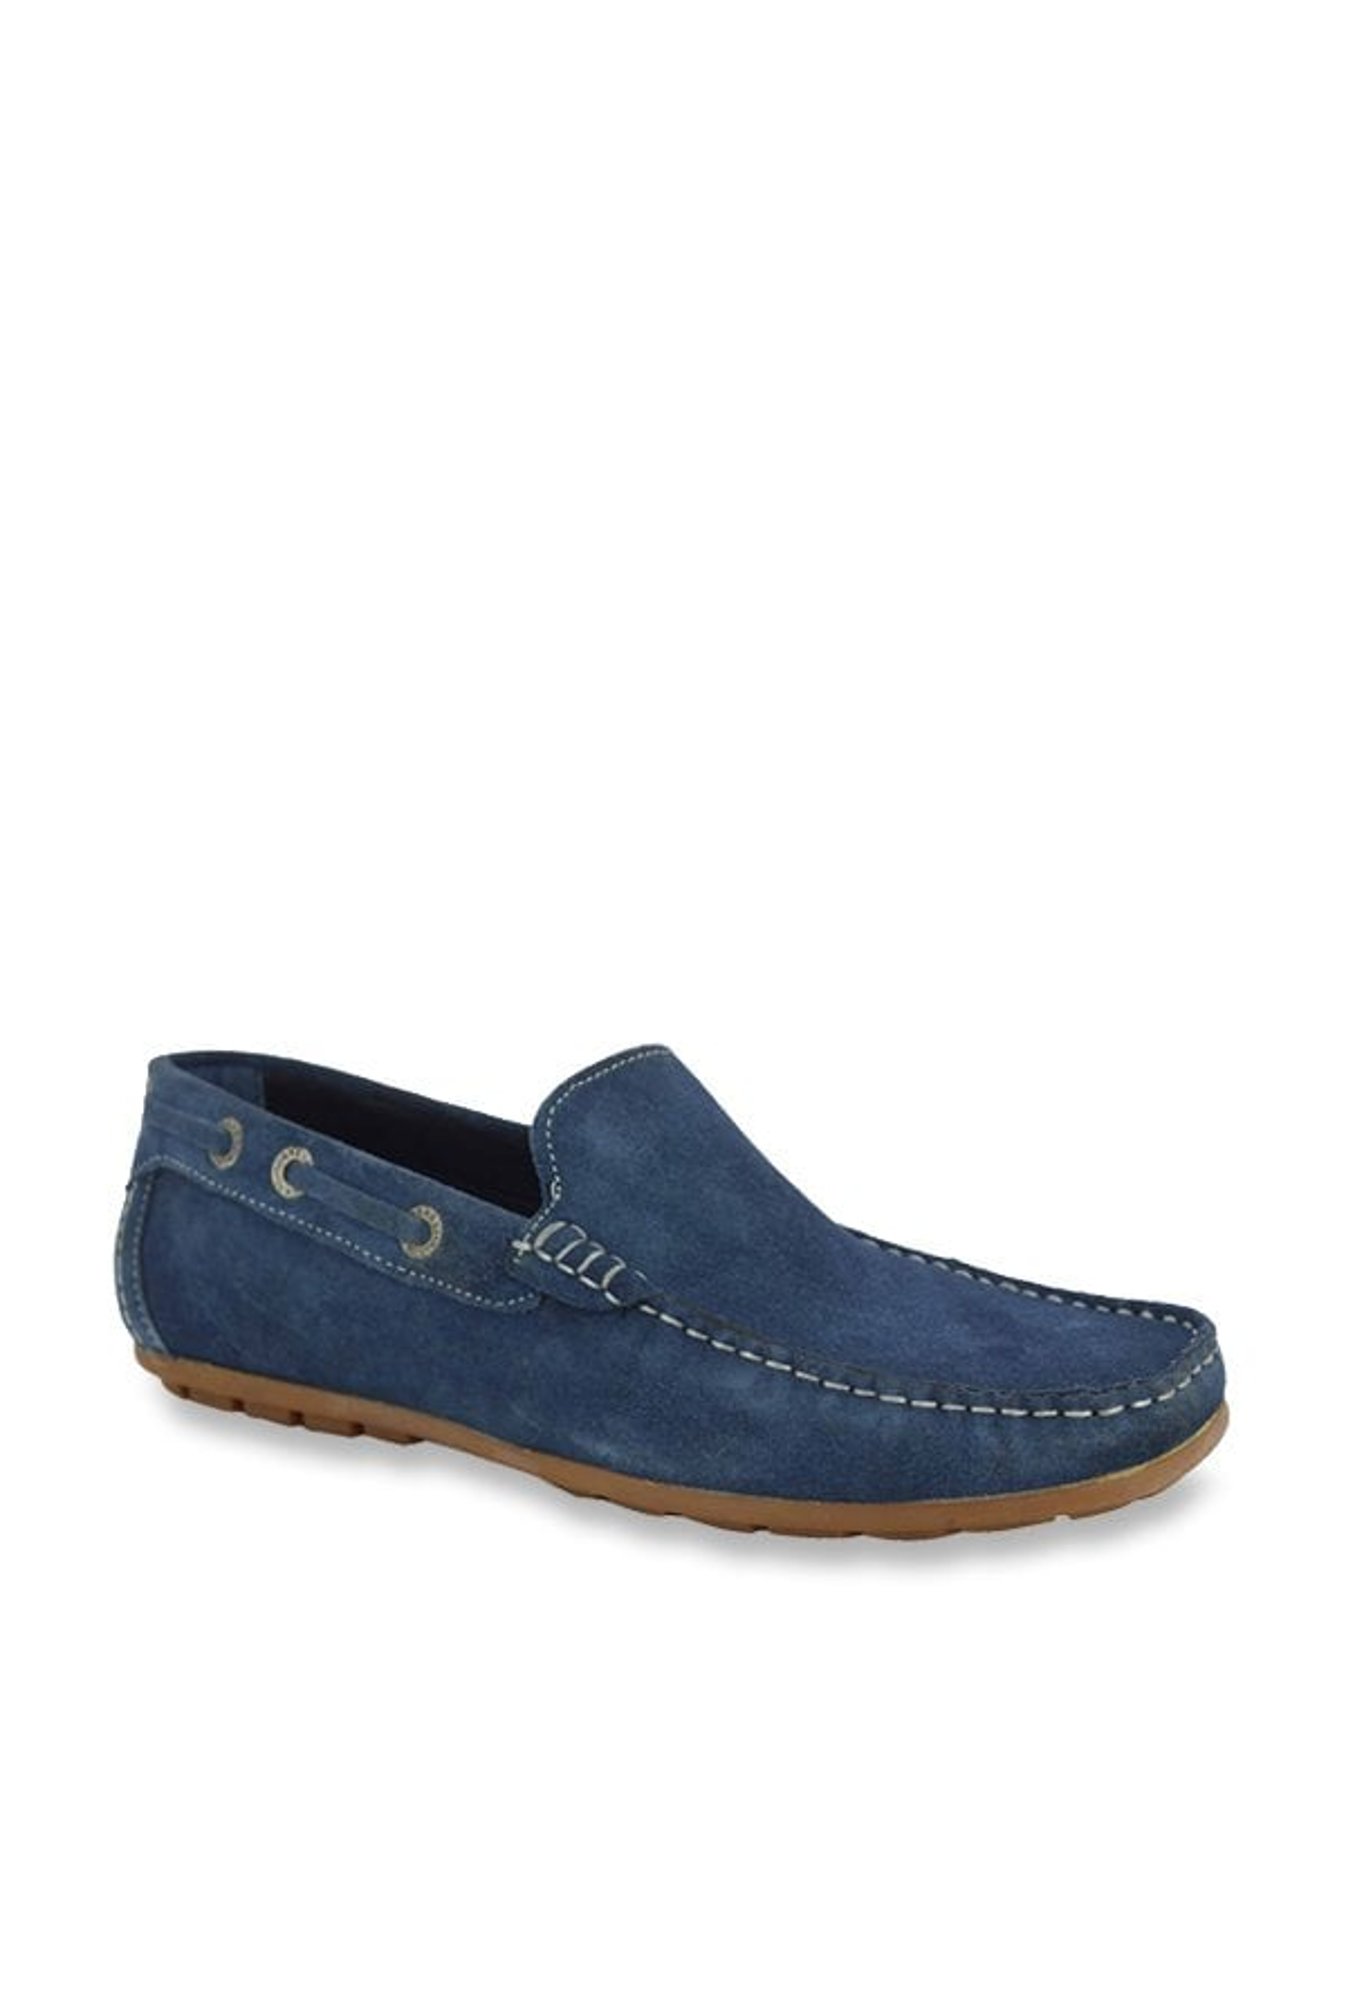 benny boat shoes